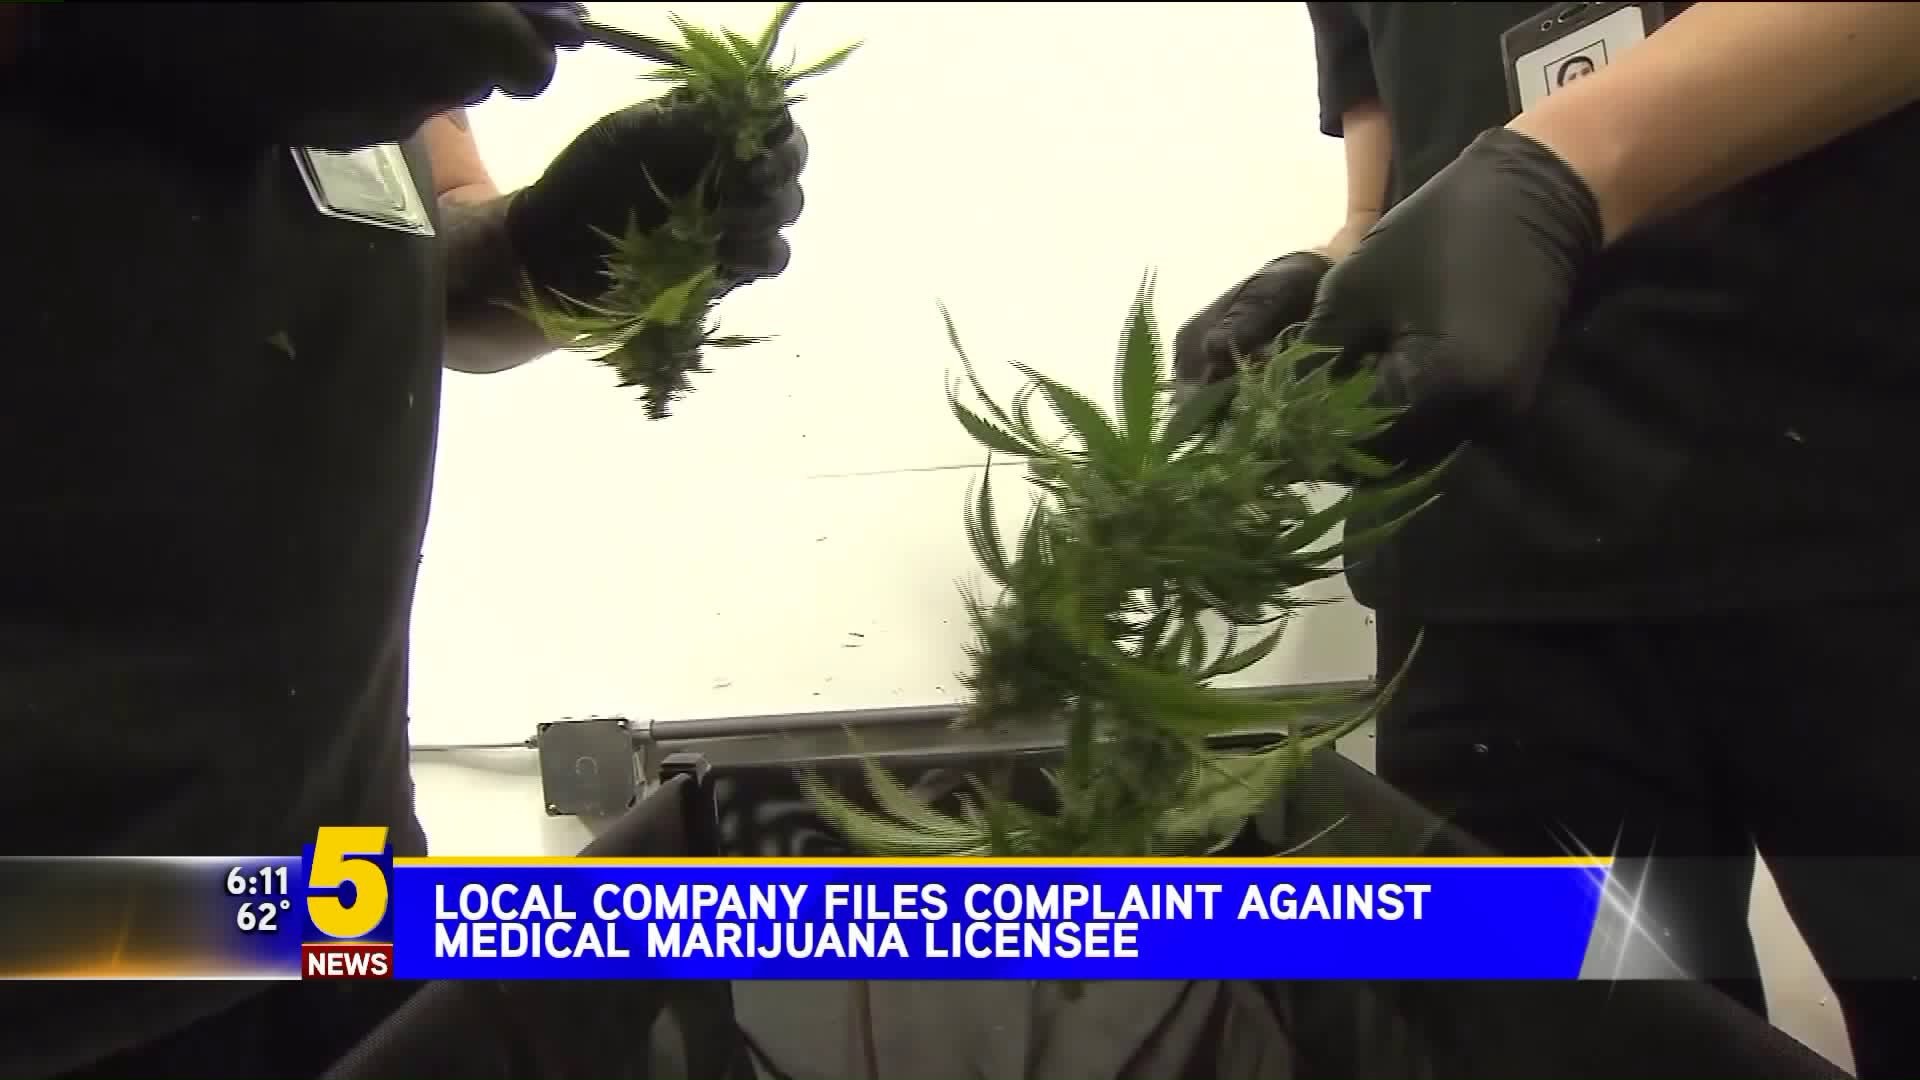 Local Company Files Complaint Against Medical Marijuana Licensee